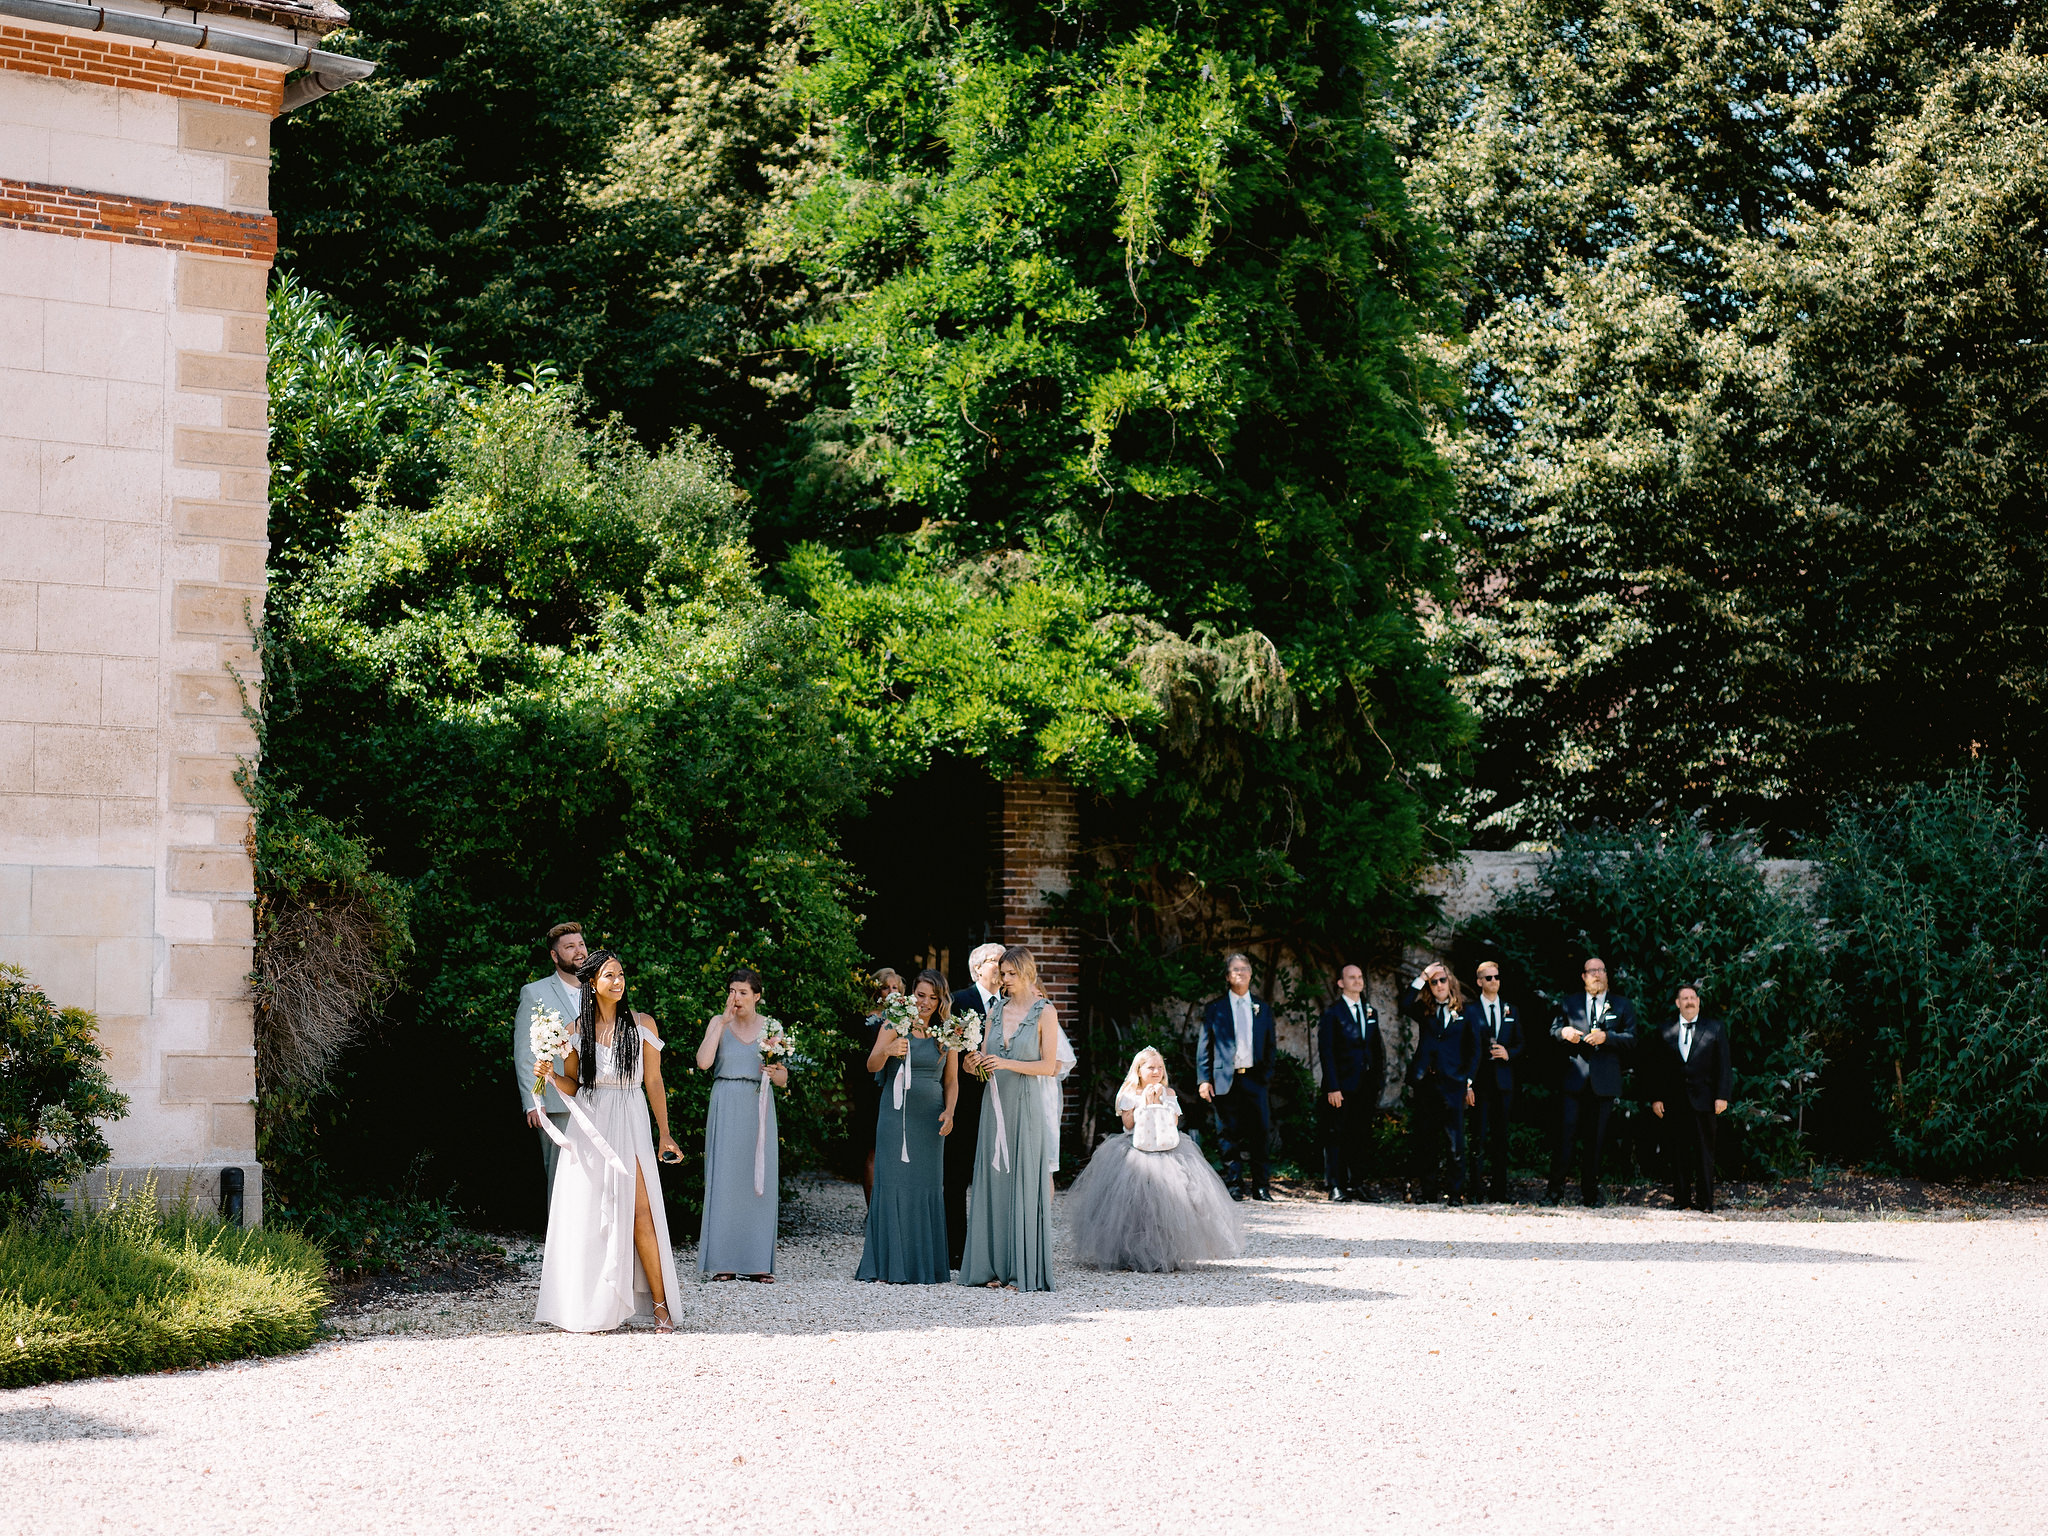 Editorial image of the wedding party waiting for the wedding ceremony to start. European destination wedding venue image by Jenny Fu Studio